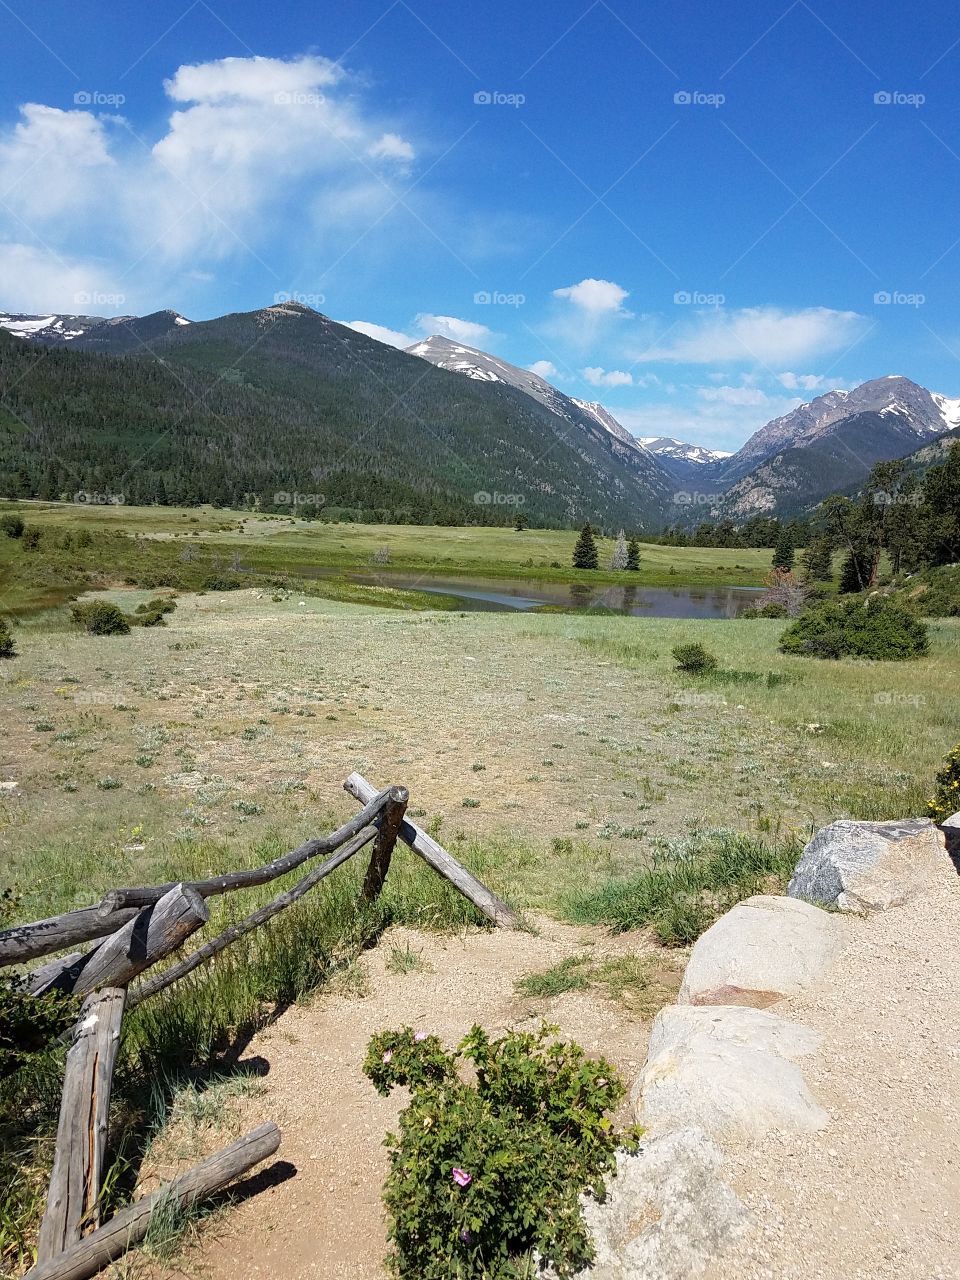 WOODEN FENCING AND MOUNTAINS